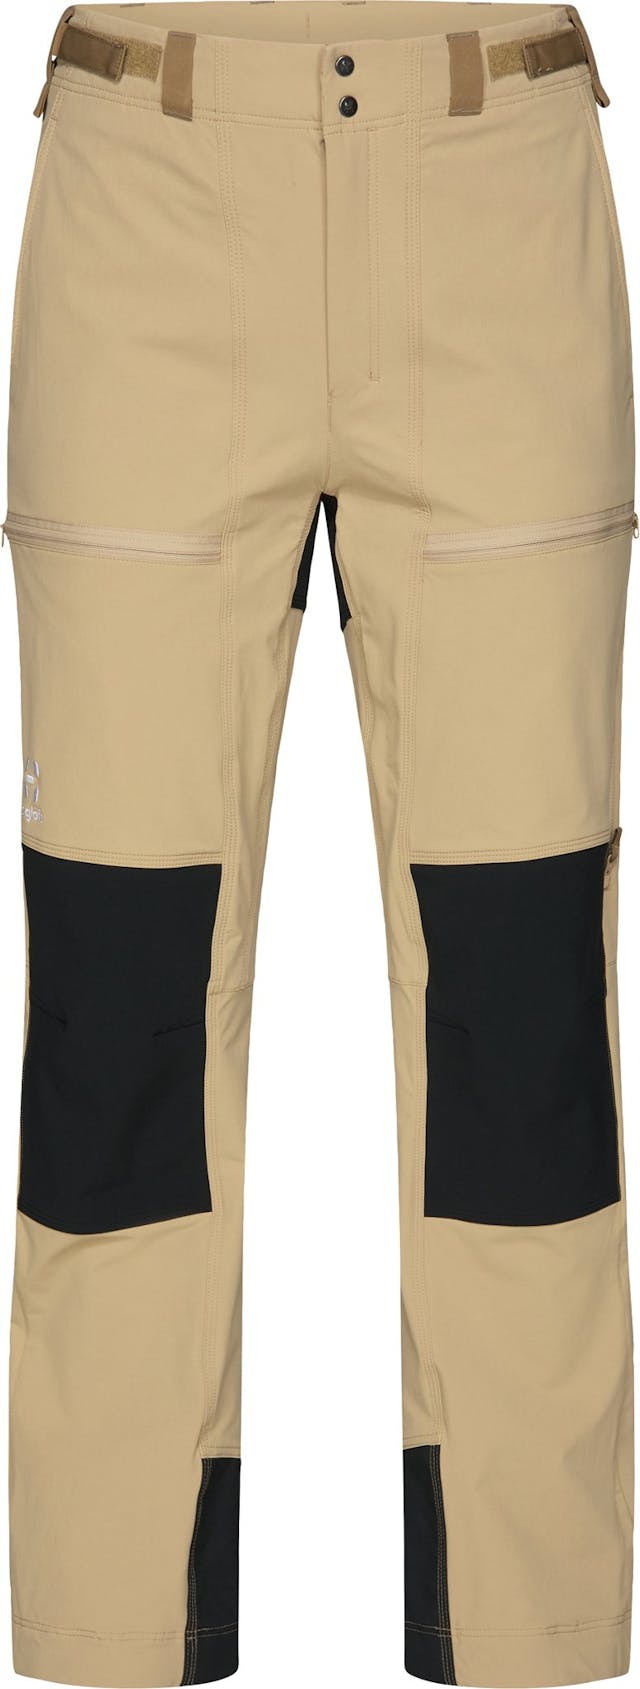 Product image for Rugged Relaxed Pant - Women's